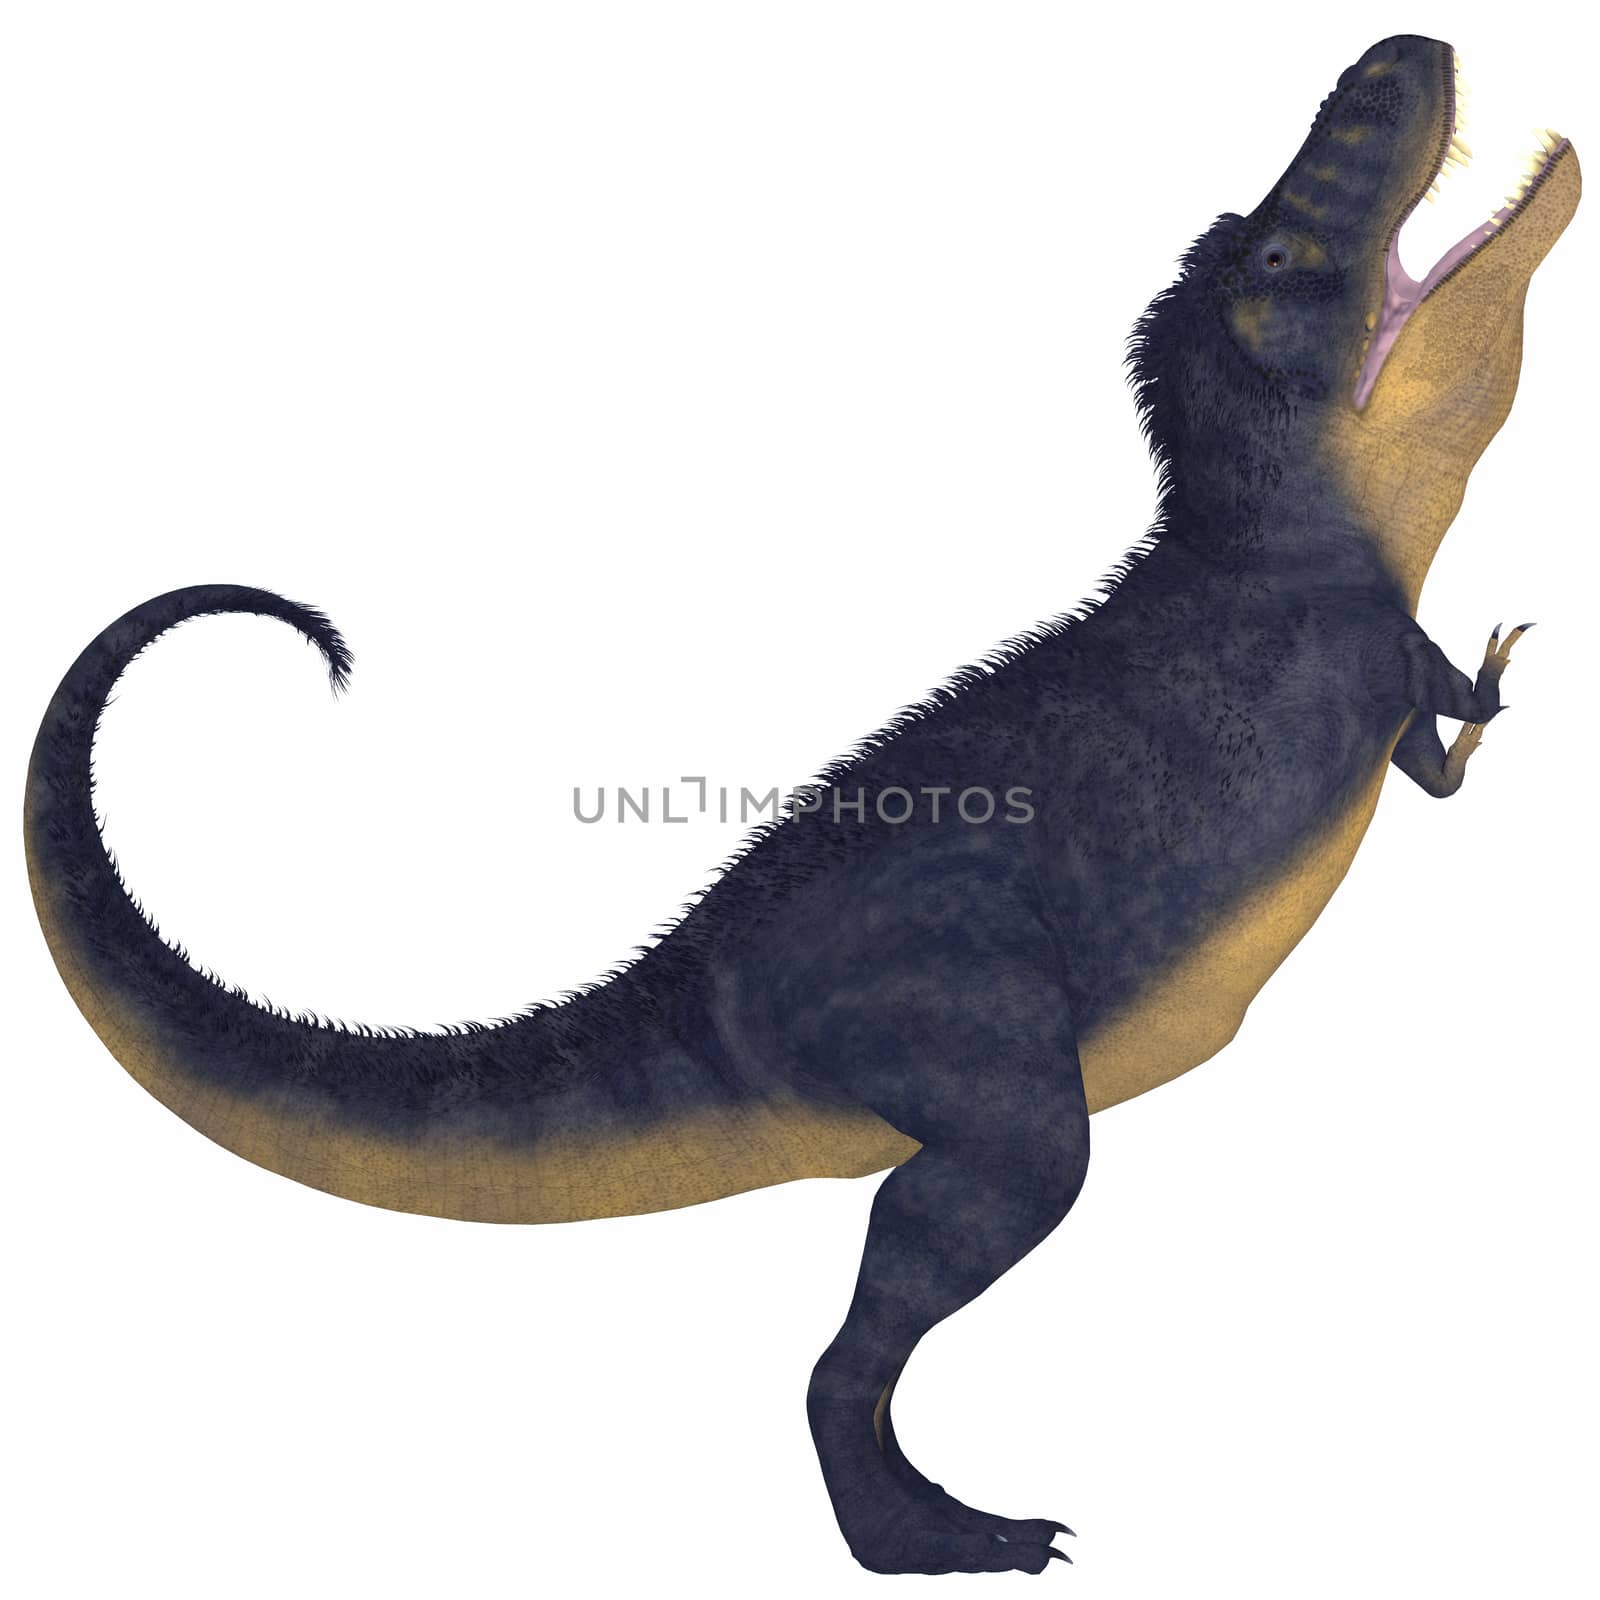 Tyrannosaurus Rex lived in North America in the Cretaceous Period and was an intimidating predator.